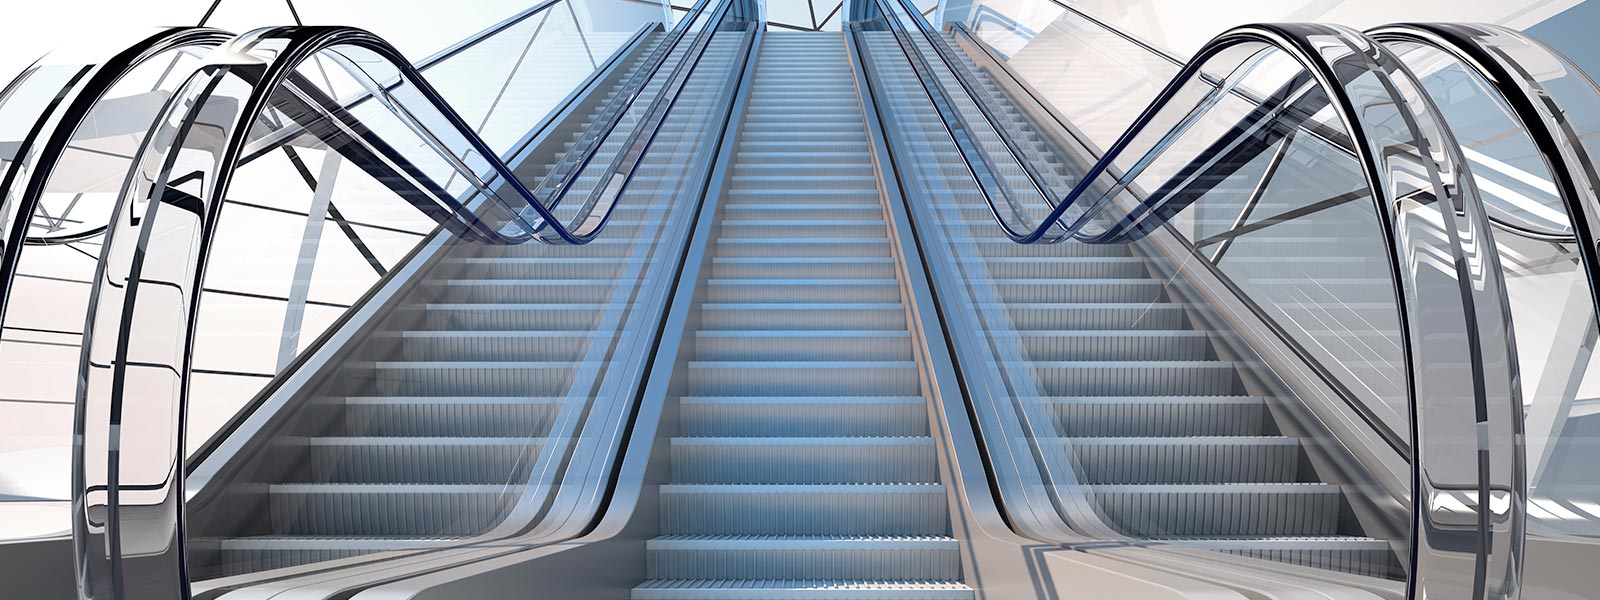 Demand for escalator accessories has surged recently